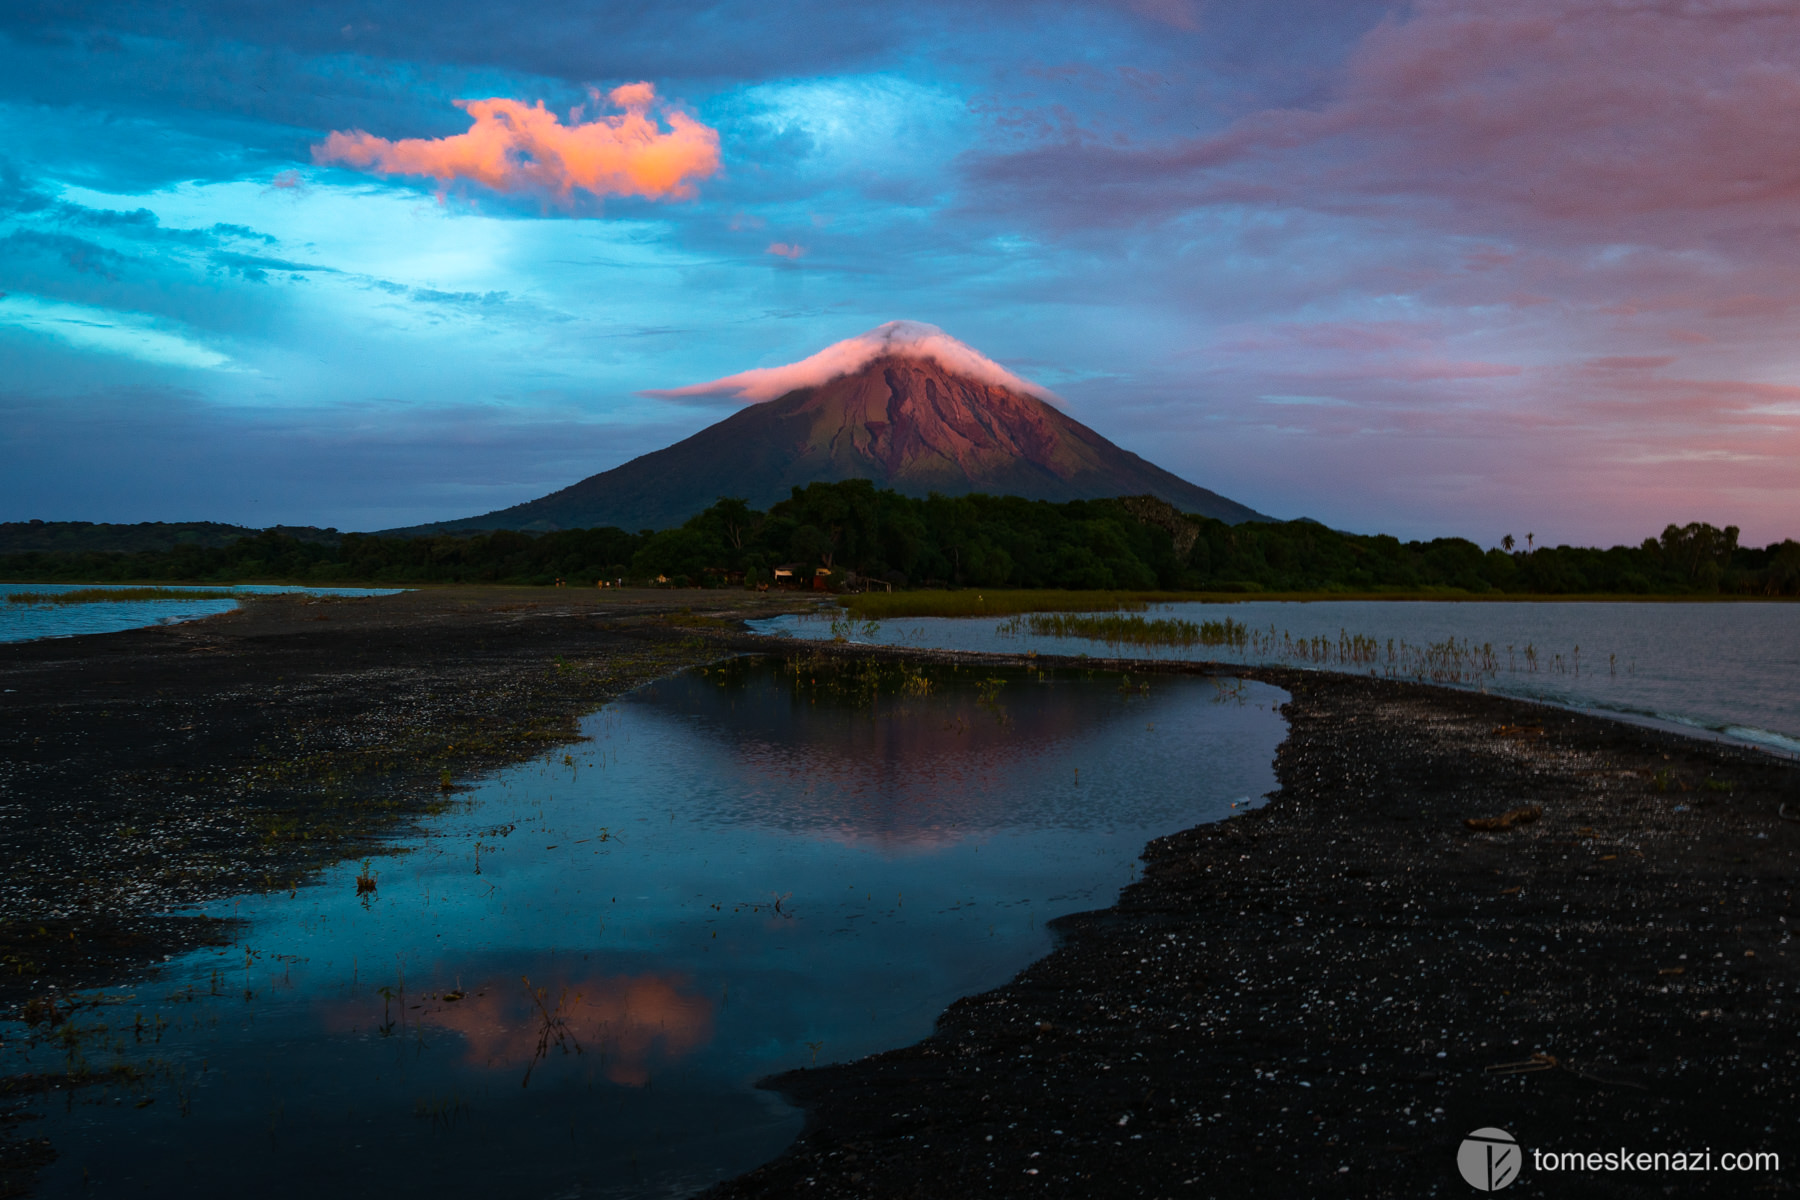 Conception Volcano at sunset, as viewed from Punta Jesus Maria, Ometepe, Nicaragua.